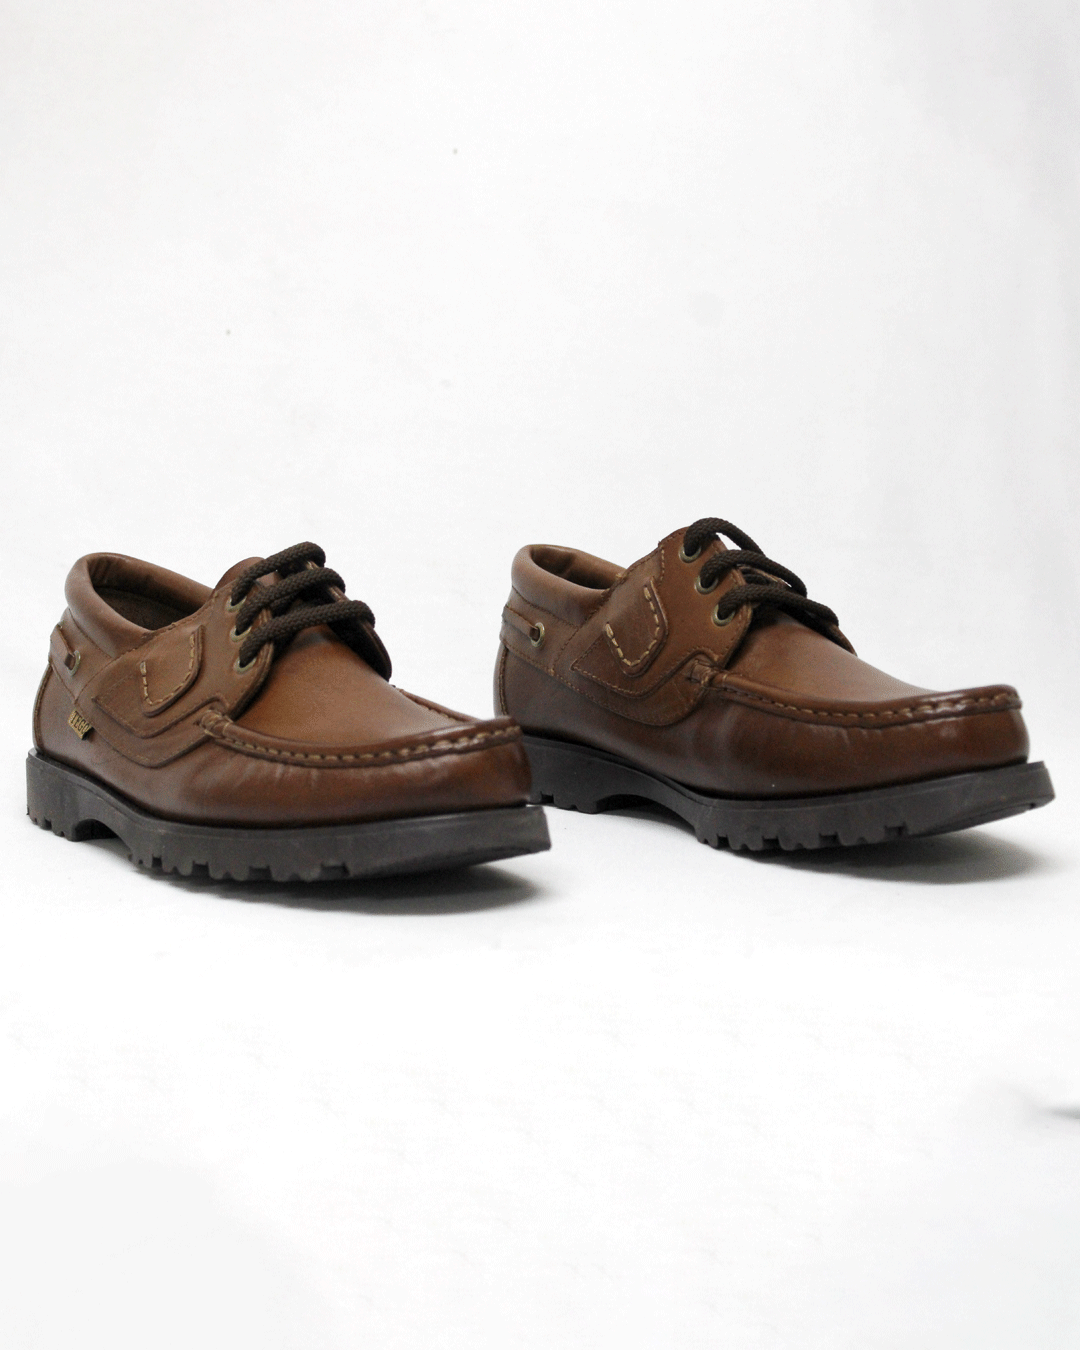 TEGO Mid Brown Leather Shoes